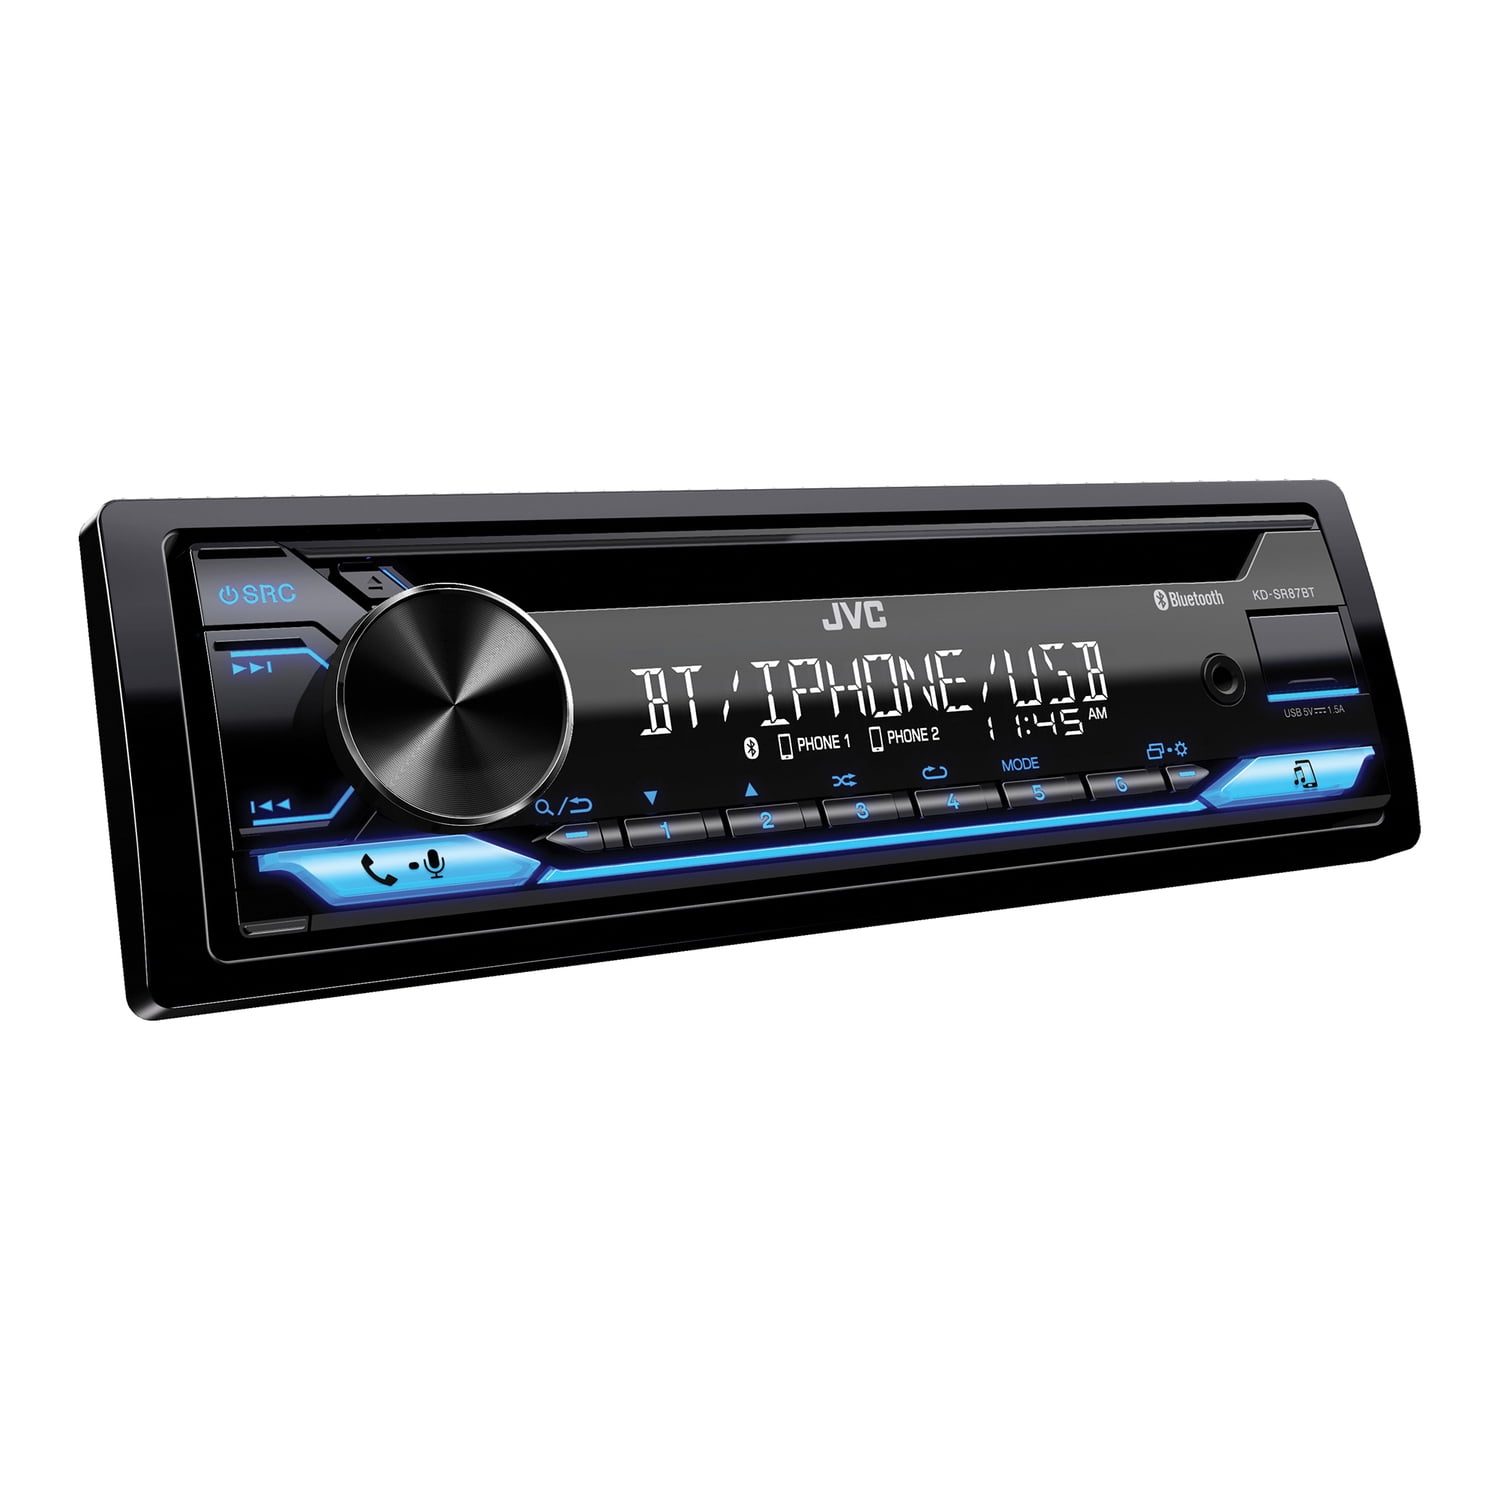 JVC KD-SR87BT Single DIN Car Stereo CD Player, with High Power Amplifier,  AM/FM Radio, Bluetooth Audio, USB, MP3, Removable Faceplate